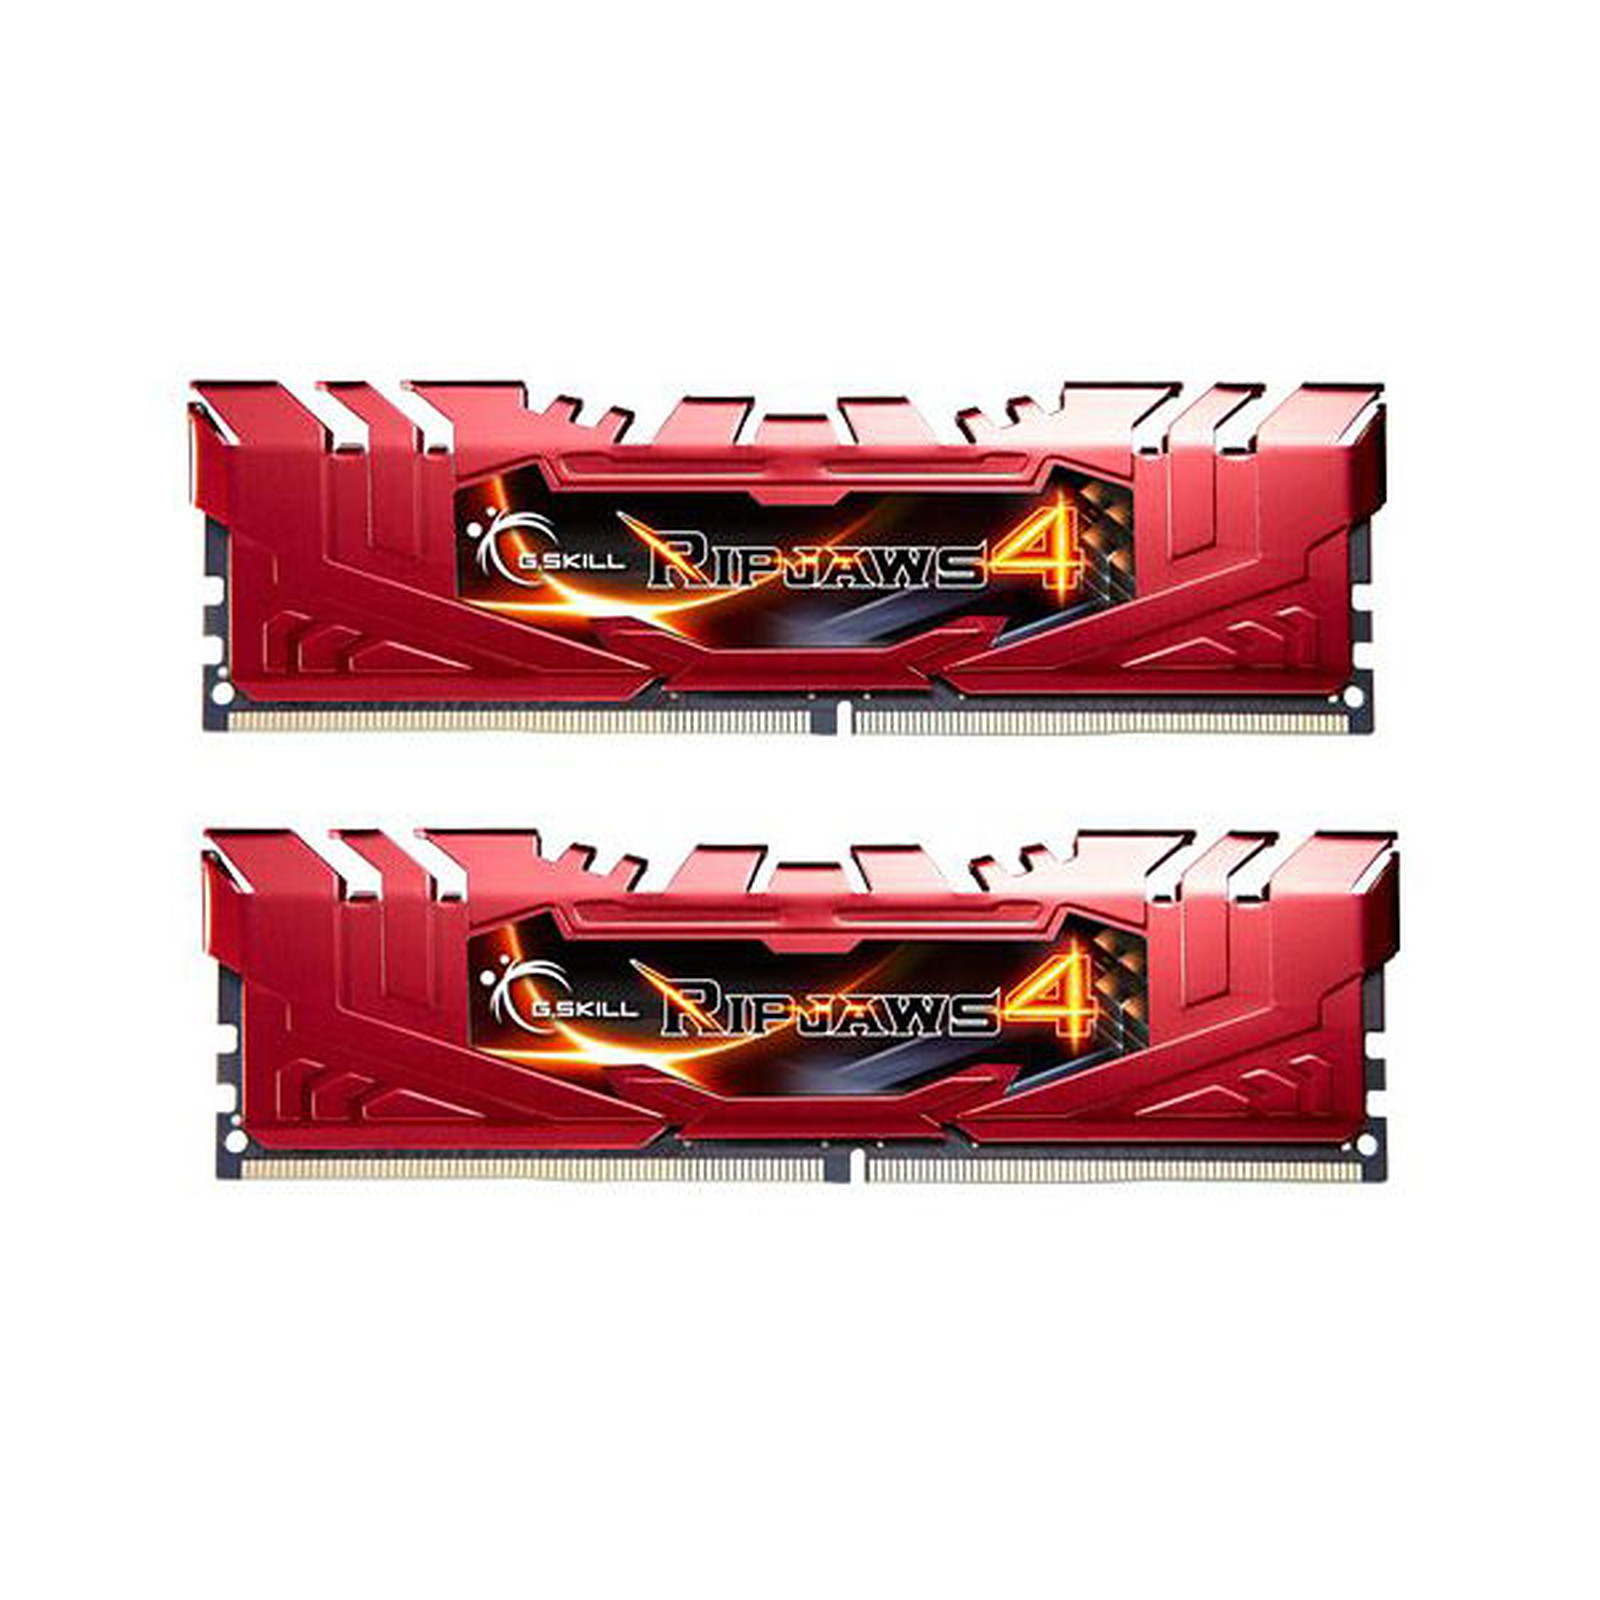 G.Skill RipJaws 4 Series Rouge 8 Go (2x 4 Go) DDR4 2400 MHz CL15 - Memoire PC G.Skill